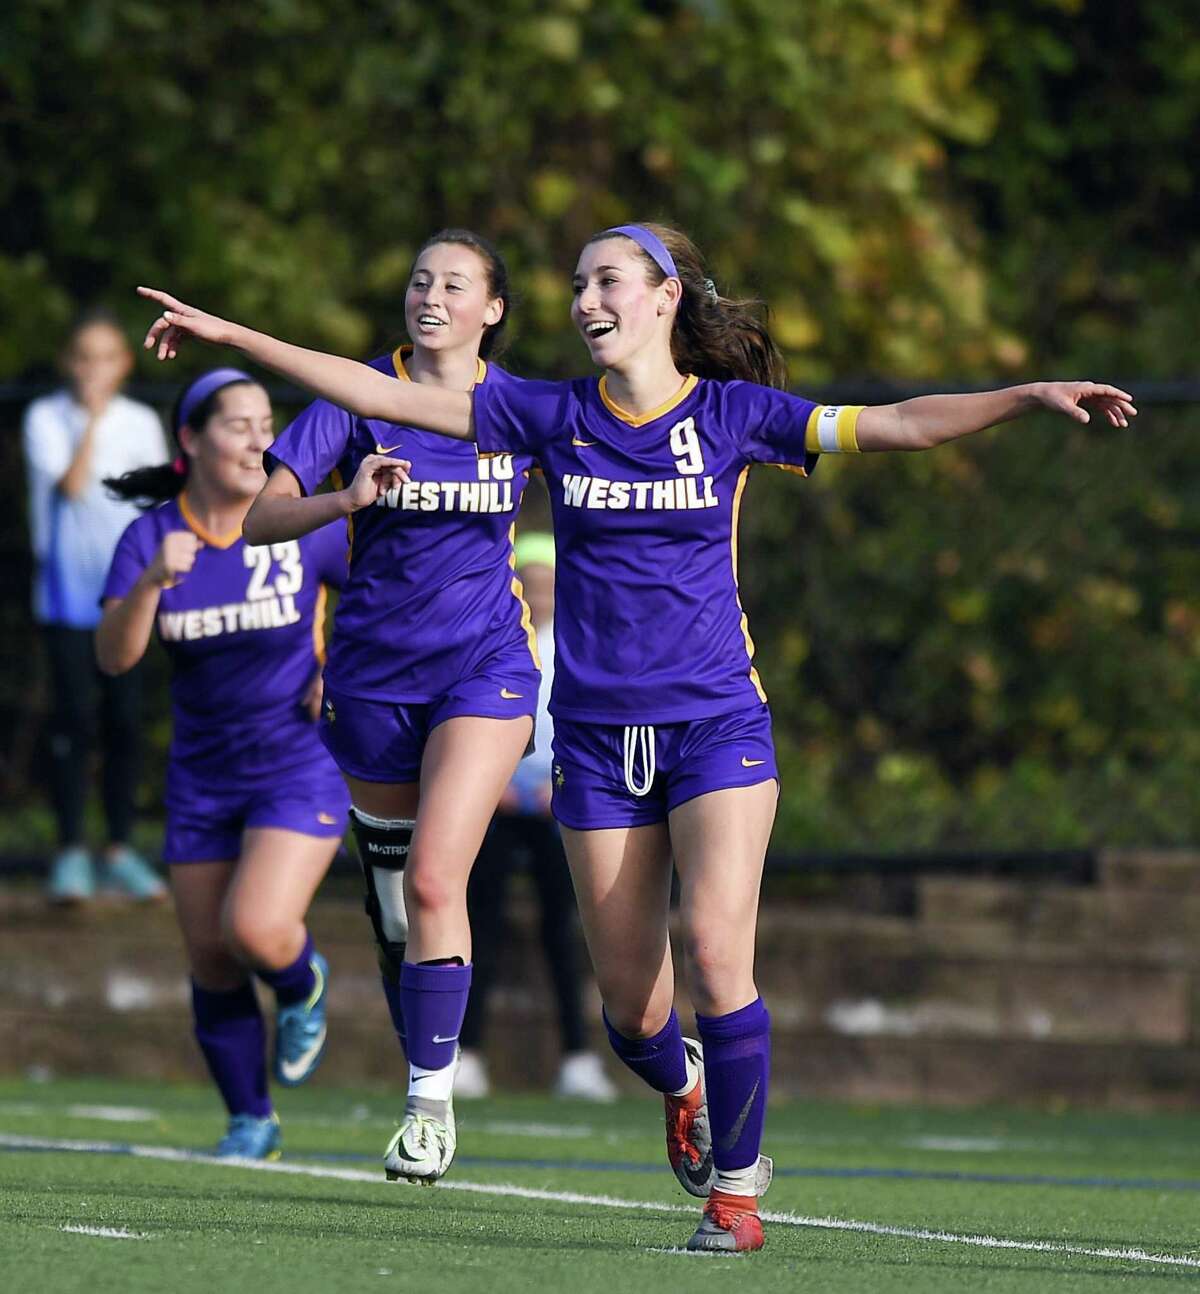 Westhill’s Corinne Dente (9) celebrates her goal against Darien in the first half of a FCIAC girls soccer game in Stamford on Tuesday. Dente scored twice in a 2-1 win.